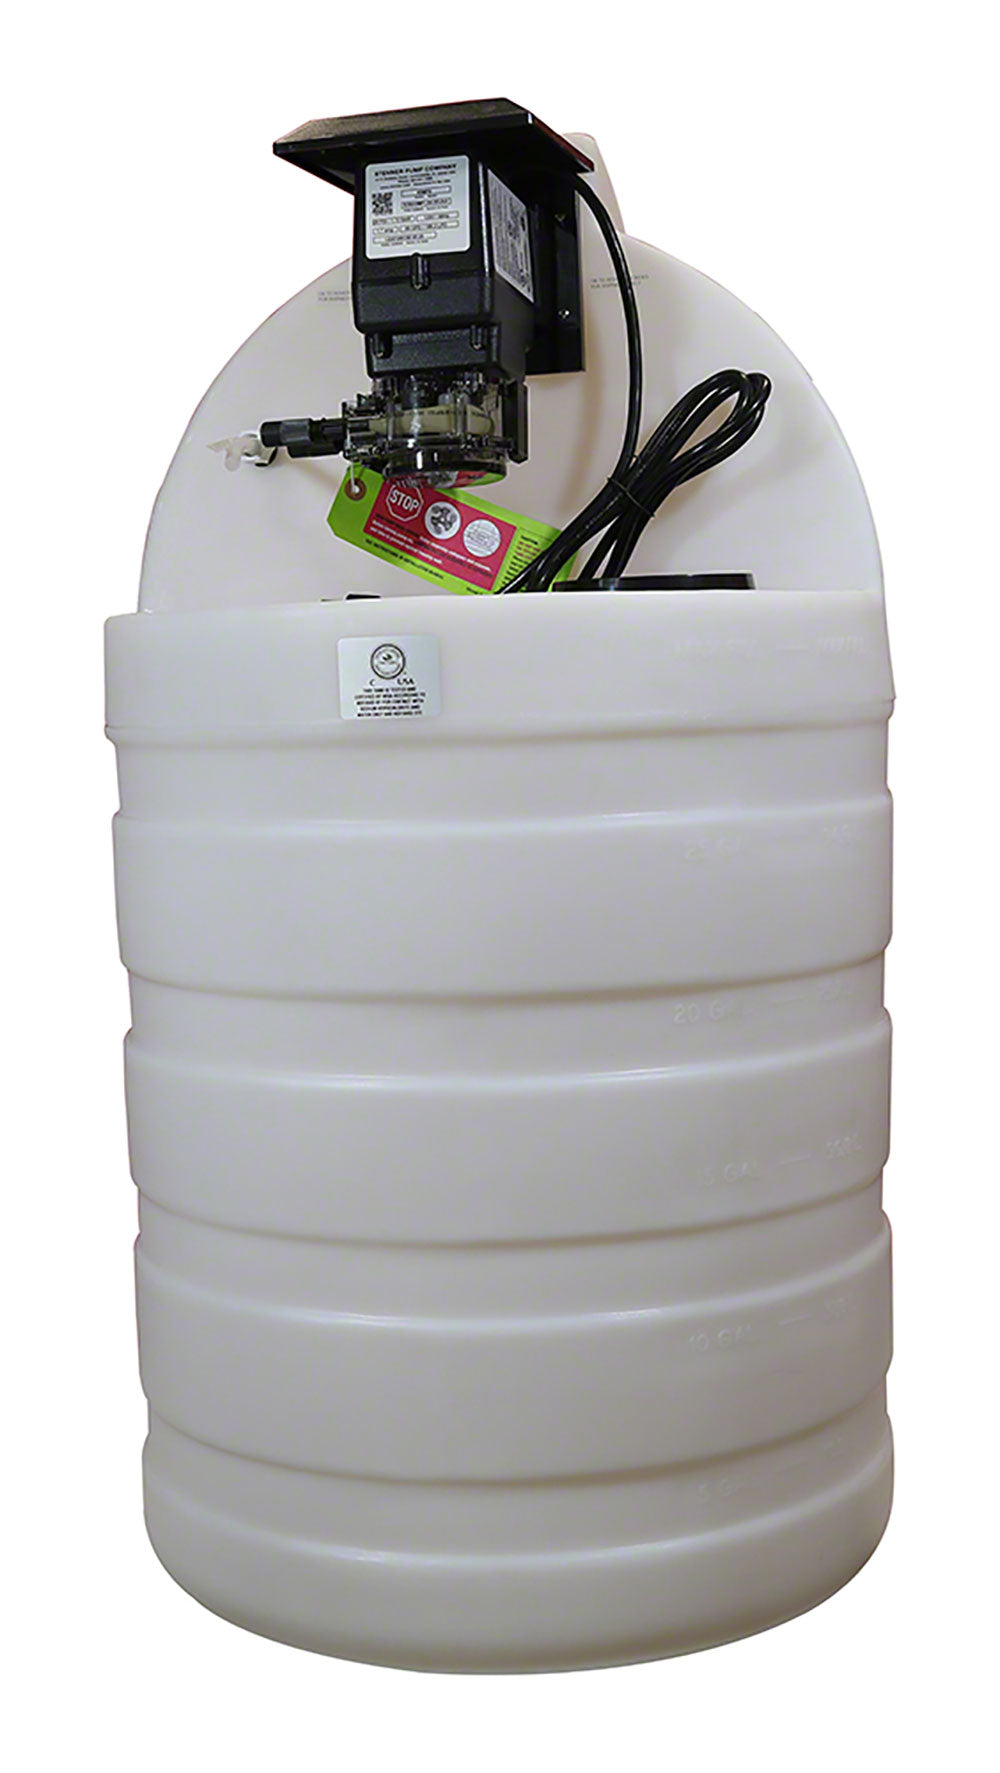 30 Gallon White Chemical Tank With 45MP5 Model Fixed Pump - 25 PSI 50 GPD 120 Volt - 3/8 Inch Standard Tubing